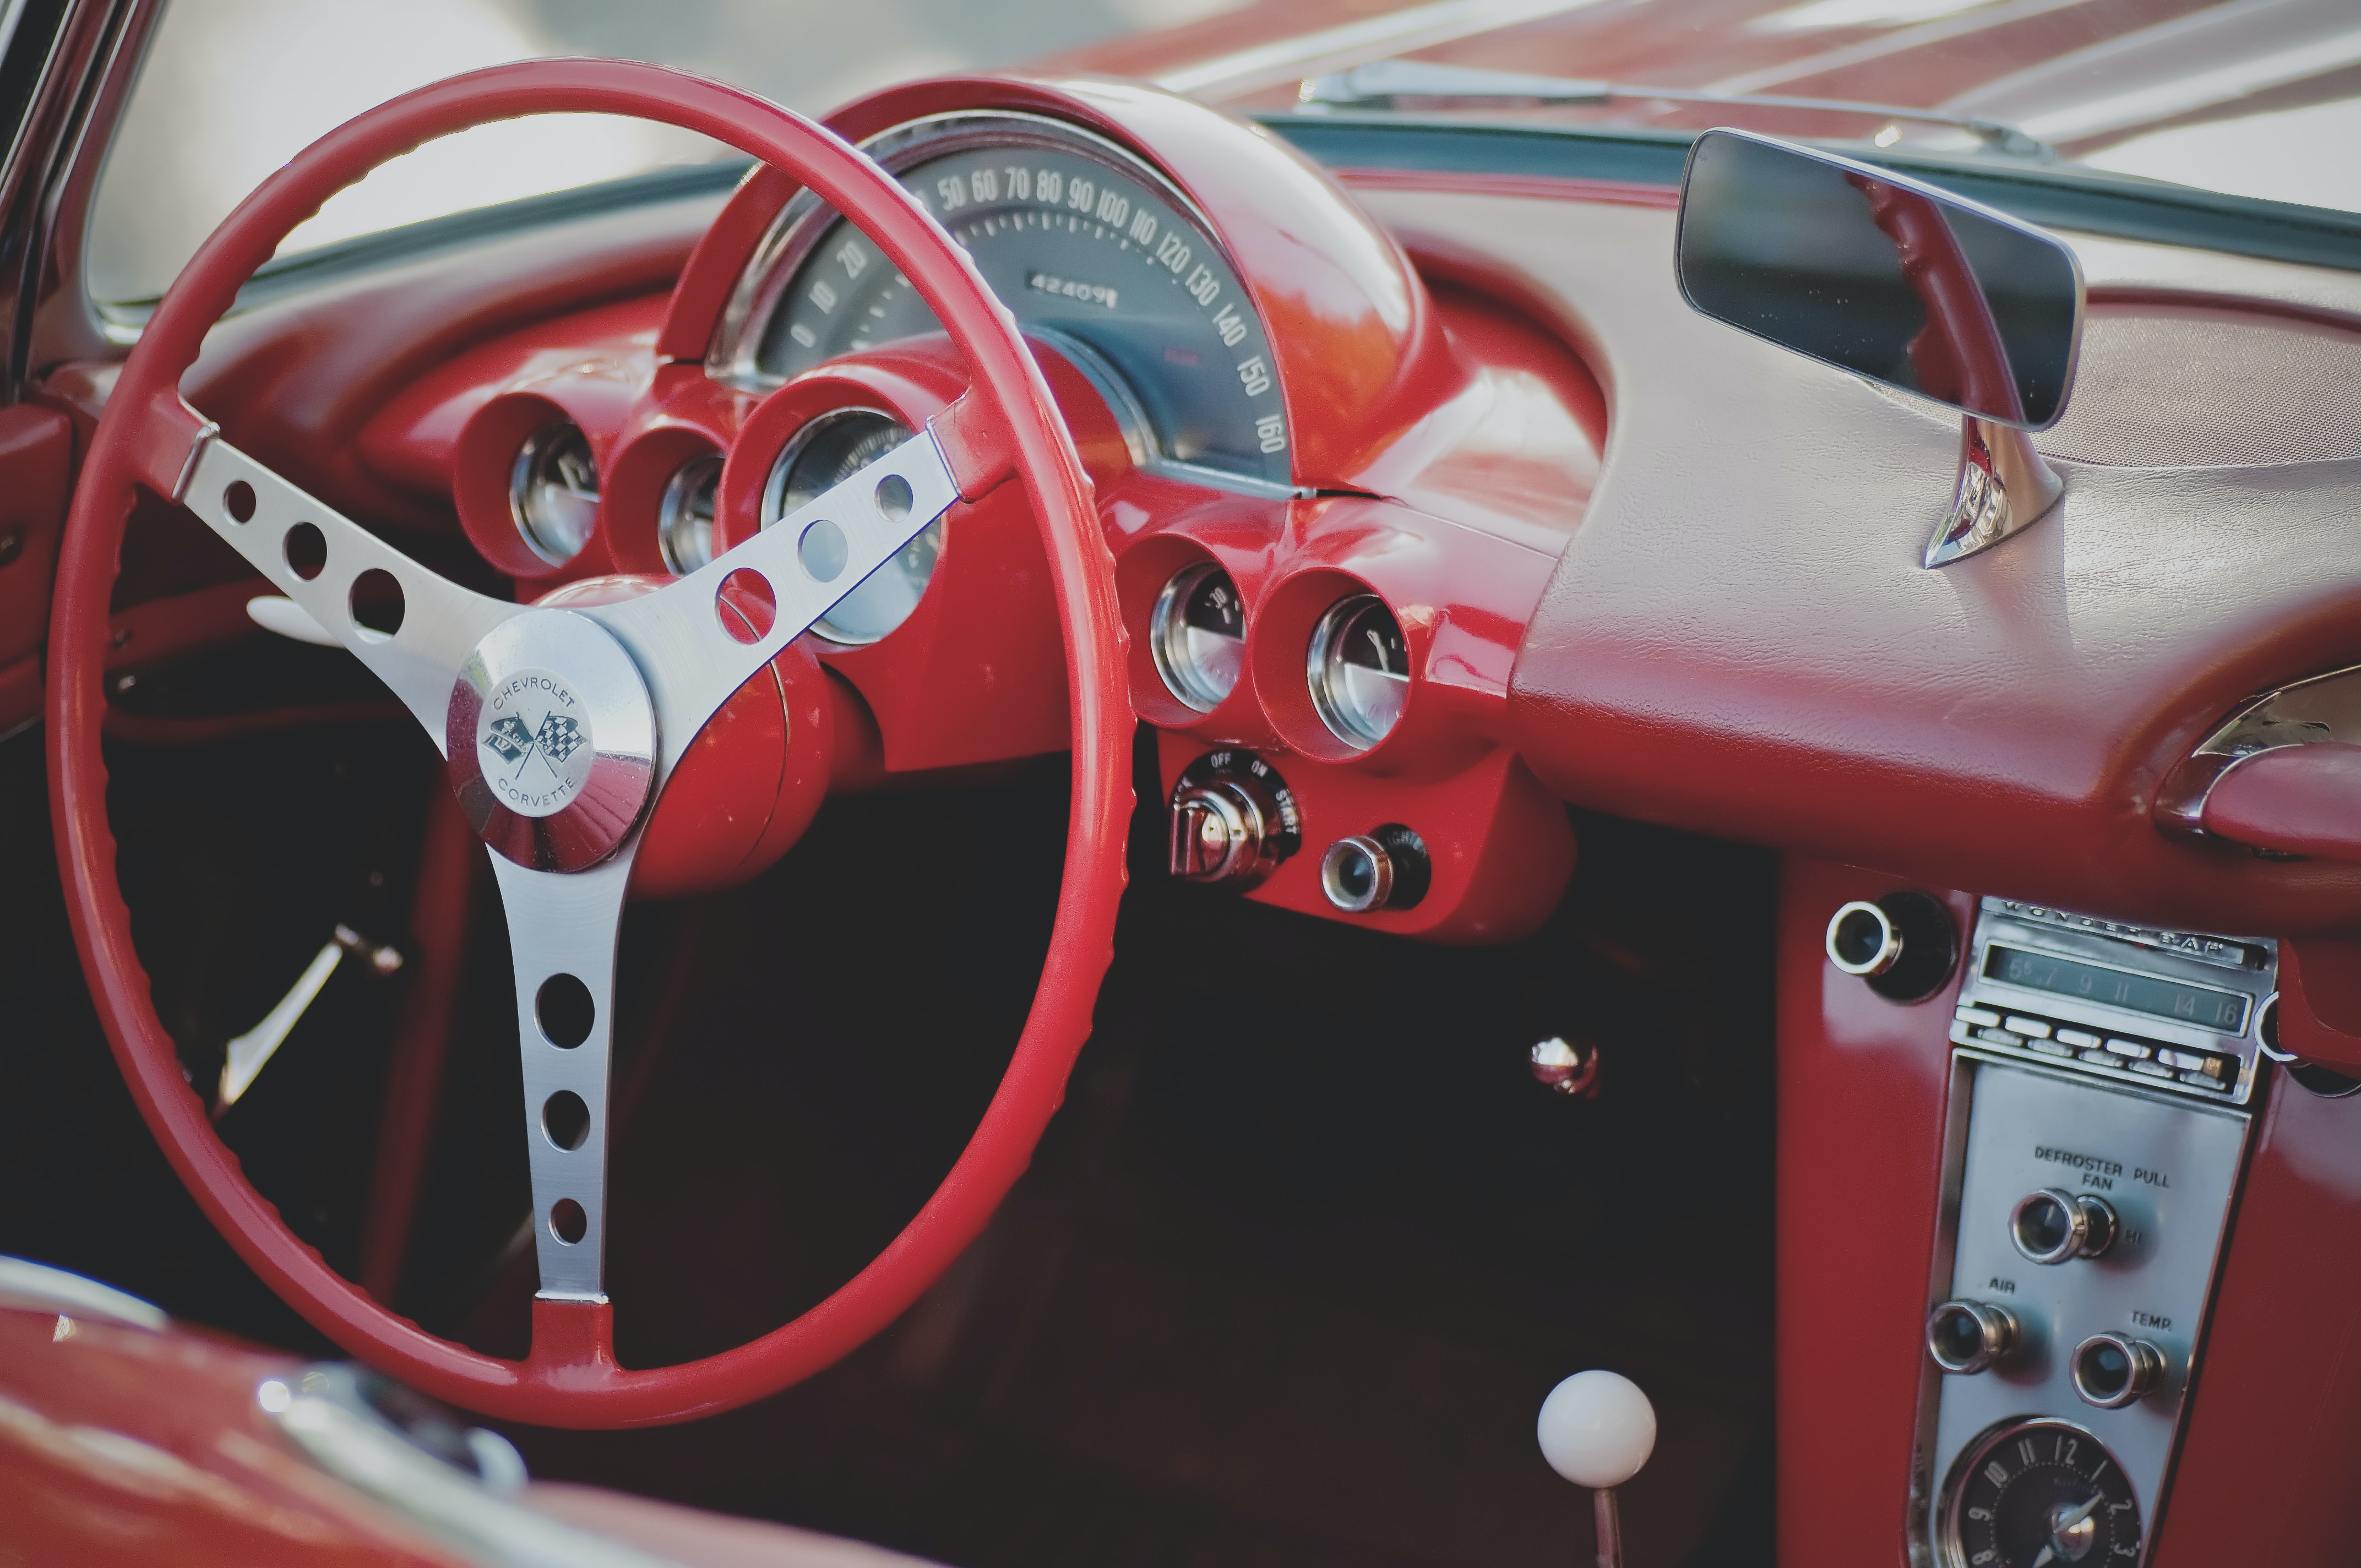 Car with a red interior